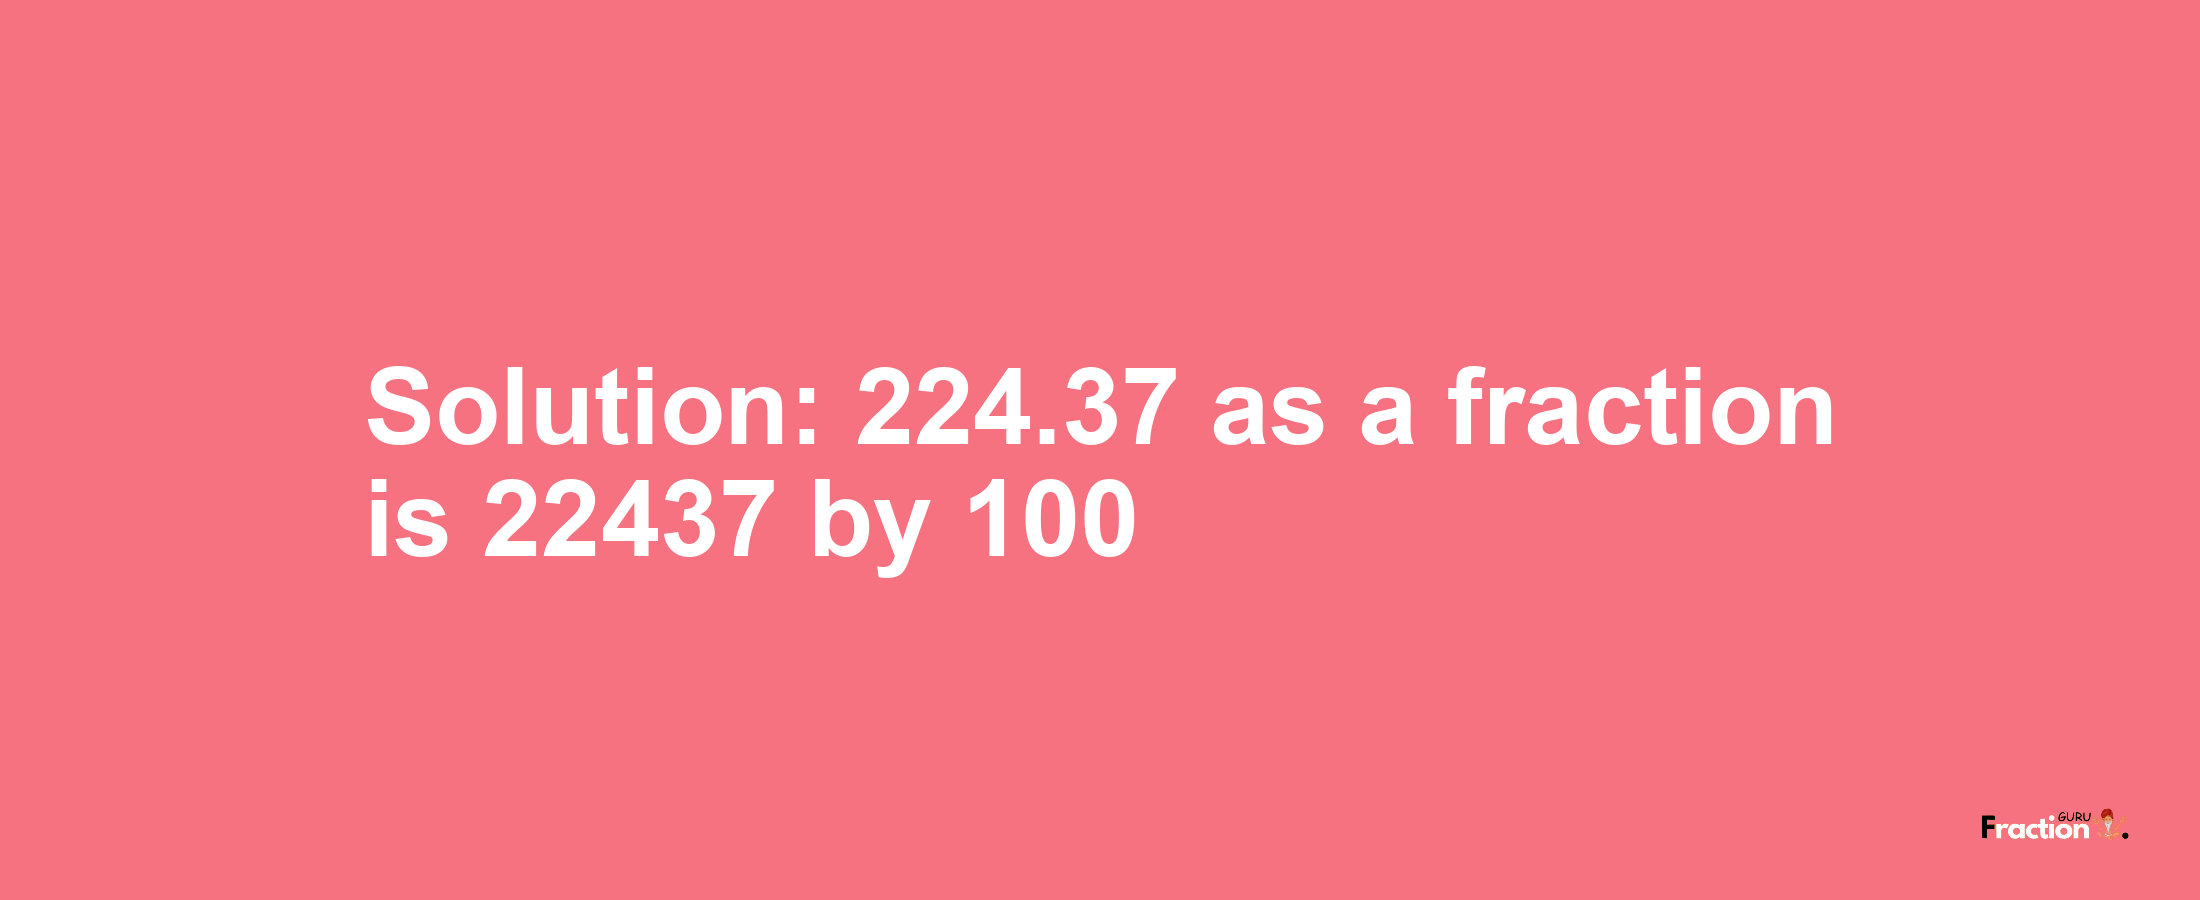 Solution:224.37 as a fraction is 22437/100